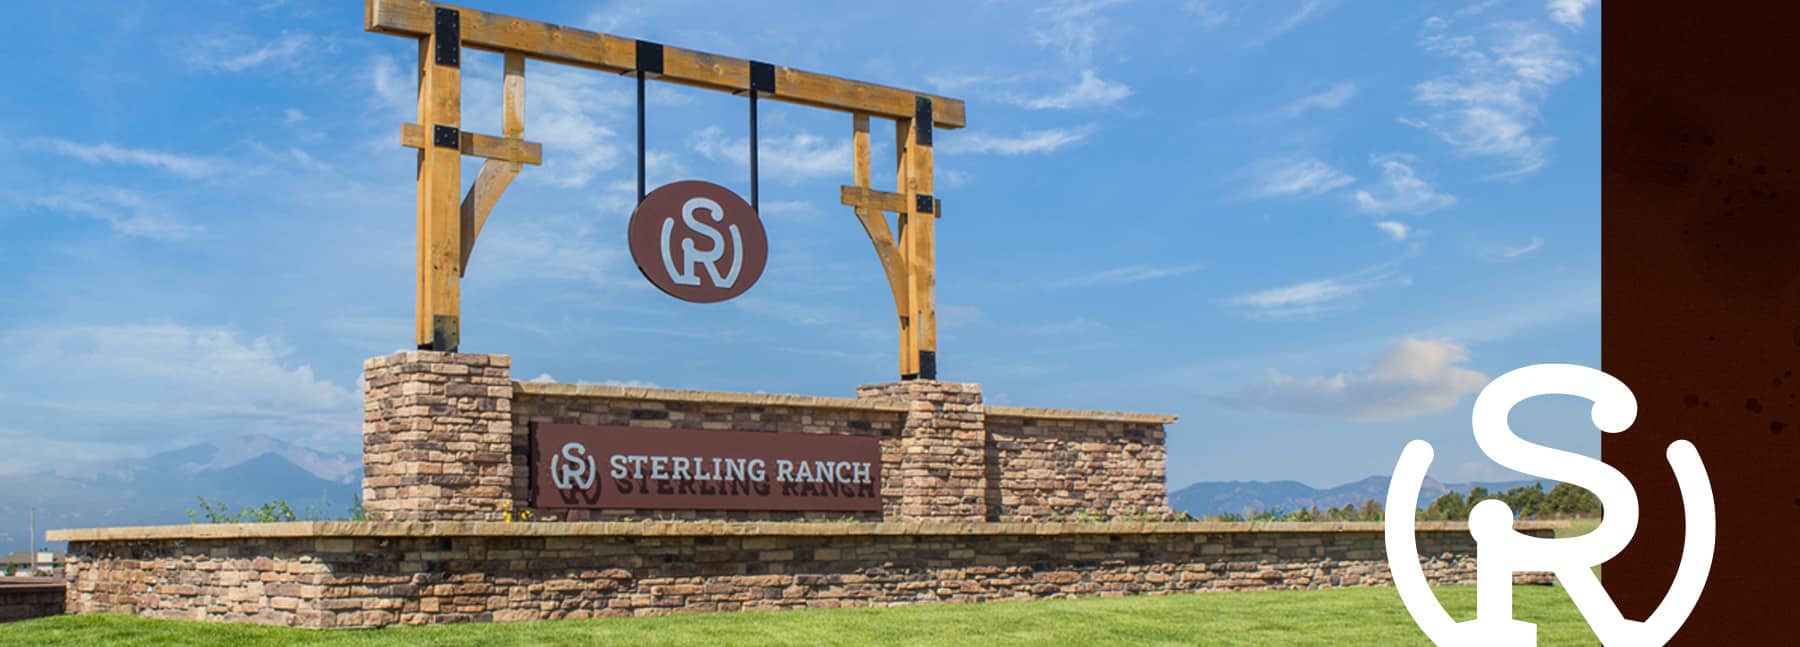 Sterling Ranch Entry Monument